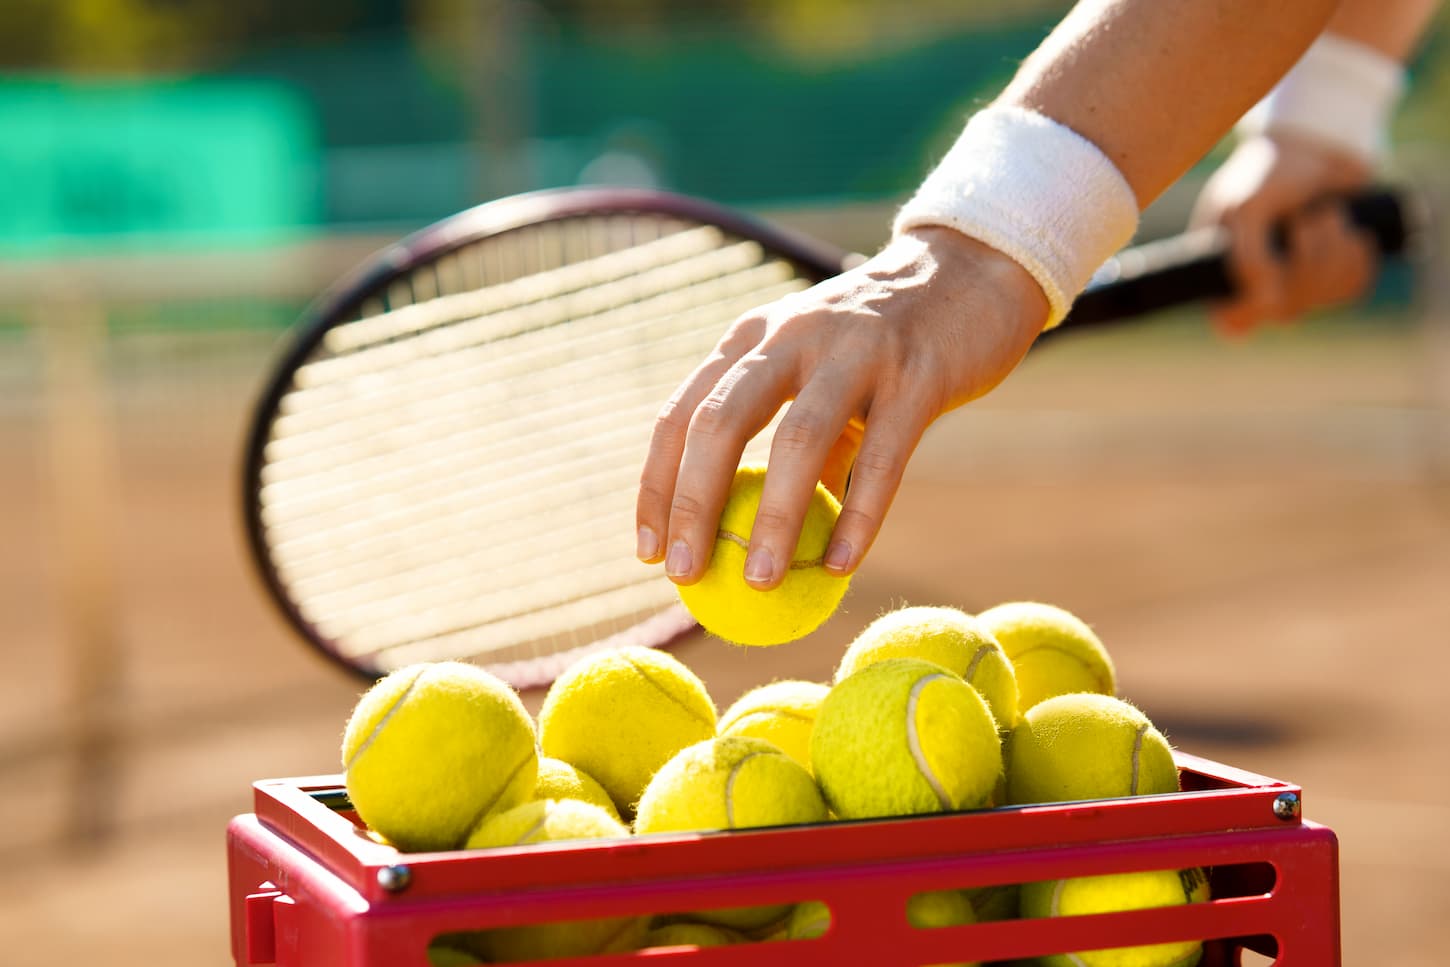 Quick Play Tennis Guide: Equipment Needed And Rules To Know